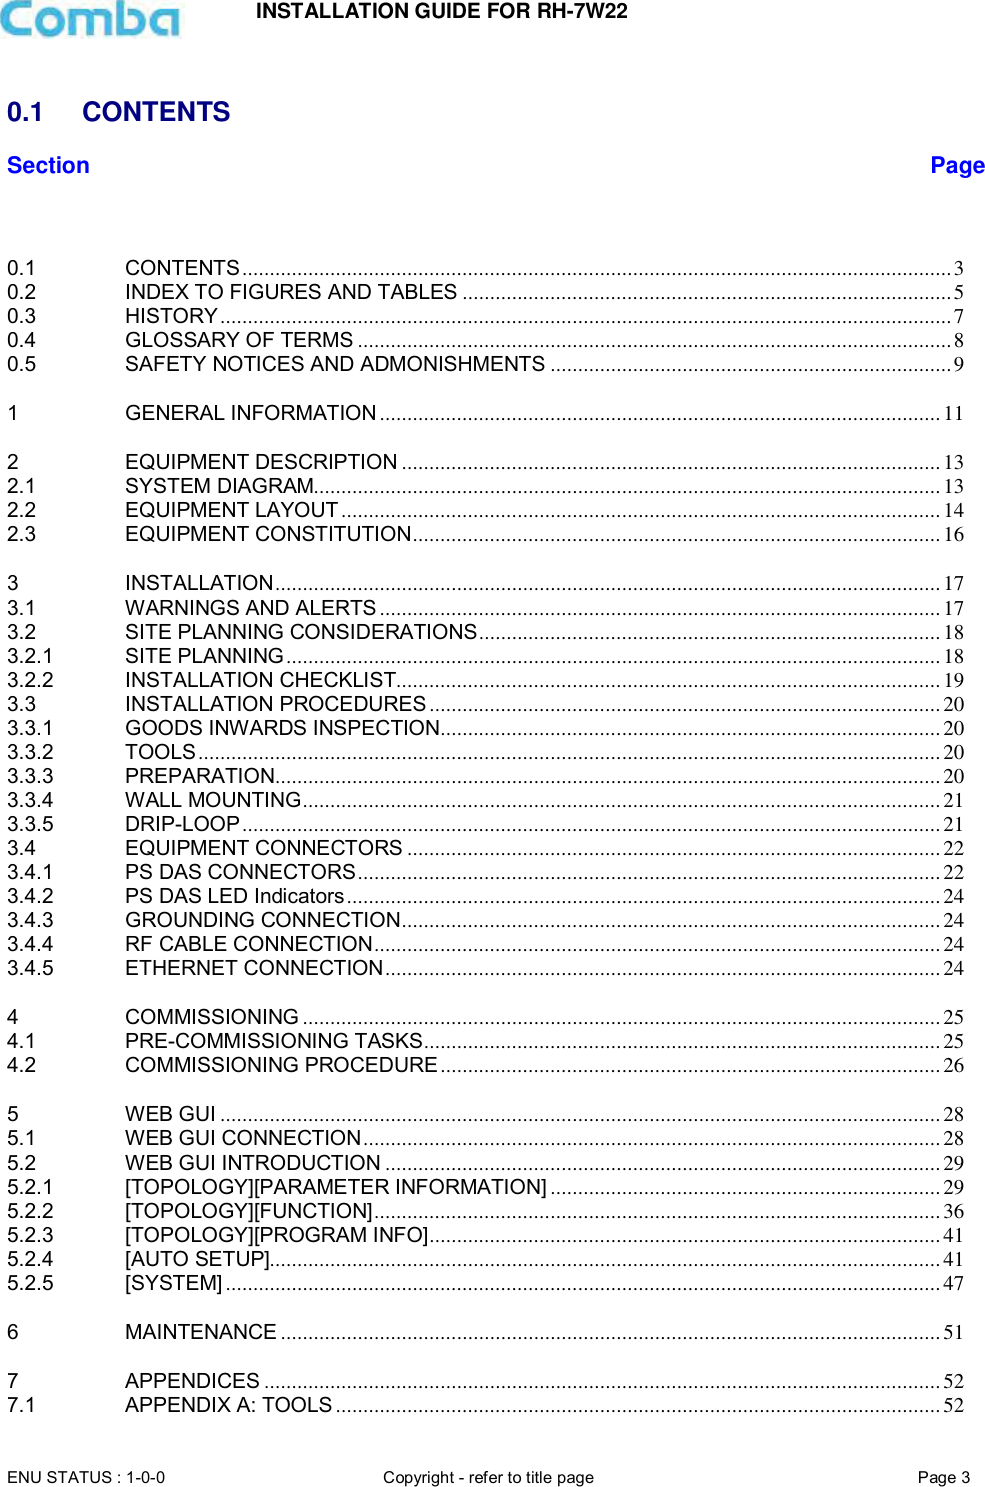 INSTALLATION GUIDE FOR RH-7W22  ENU STATUS : 1-0-0 Copyright - refer to title page Page 3      0.1  CONTENTS Section Page   0.1 CONTENTS ................................................................................................................................. 3 0.2 INDEX TO FIGURES AND TABLES ......................................................................................... 5 0.3 HISTORY ..................................................................................................................................... 7 0.4 GLOSSARY OF TERMS ............................................................................................................ 8 0.5 SAFETY NOTICES AND ADMONISHMENTS ......................................................................... 9 1 GENERAL INFORMATION ...................................................................................................... 11 2 EQUIPMENT DESCRIPTION .................................................................................................. 13 2.1 SYSTEM DIAGRAM.................................................................................................................. 13 2.2 EQUIPMENT LAYOUT ............................................................................................................. 14 2.3 EQUIPMENT CONSTITUTION ................................................................................................ 16 3 INSTALLATION ......................................................................................................................... 17 3.1 WARNINGS AND ALERTS ...................................................................................................... 17 3.2 SITE PLANNING CONSIDERATIONS .................................................................................... 18 3.2.1 SITE PLANNING ....................................................................................................................... 18 3.2.2 INSTALLATION CHECKLIST................................................................................................... 19 3.3 INSTALLATION PROCEDURES ............................................................................................. 20 3.3.1 GOODS INWARDS INSPECTION........................................................................................... 20 3.3.2 TOOLS ....................................................................................................................................... 20 3.3.3 PREPARATION ......................................................................................................................... 20 3.3.4 WALL MOUNTING .................................................................................................................... 21 3.3.5 DRIP-LOOP ............................................................................................................................... 21 3.4 EQUIPMENT CONNECTORS ................................................................................................. 22 3.4.1 PS DAS CONNECTORS .......................................................................................................... 22 3.4.2 PS DAS LED Indicators ............................................................................................................ 24 3.4.3 GROUNDING CONNECTION .................................................................................................. 24 3.4.4 RF CABLE CONNECTION ....................................................................................................... 24 3.4.5 ETHERNET CONNECTION ..................................................................................................... 24 4 COMMISSIONING .................................................................................................................... 25 4.1 PRE-COMMISSIONING TASKS .............................................................................................. 25 4.2 COMMISSIONING PROCEDURE ........................................................................................... 26 5 WEB GUI ................................................................................................................................... 28 5.1 WEB GUI CONNECTION ......................................................................................................... 28 5.2 WEB GUI INTRODUCTION ..................................................................................................... 29 5.2.1 [TOPOLOGY][PARAMETER INFORMATION] ....................................................................... 29 5.2.2 [TOPOLOGY][FUNCTION] ....................................................................................................... 36 5.2.3 [TOPOLOGY][PROGRAM INFO] ............................................................................................. 41 5.2.4 [AUTO SETUP].......................................................................................................................... 41 5.2.5 [SYSTEM] .................................................................................................................................. 47 6 MAINTENANCE ........................................................................................................................ 51 7 APPENDICES ........................................................................................................................... 52 7.1 APPENDIX A: TOOLS .............................................................................................................. 52 